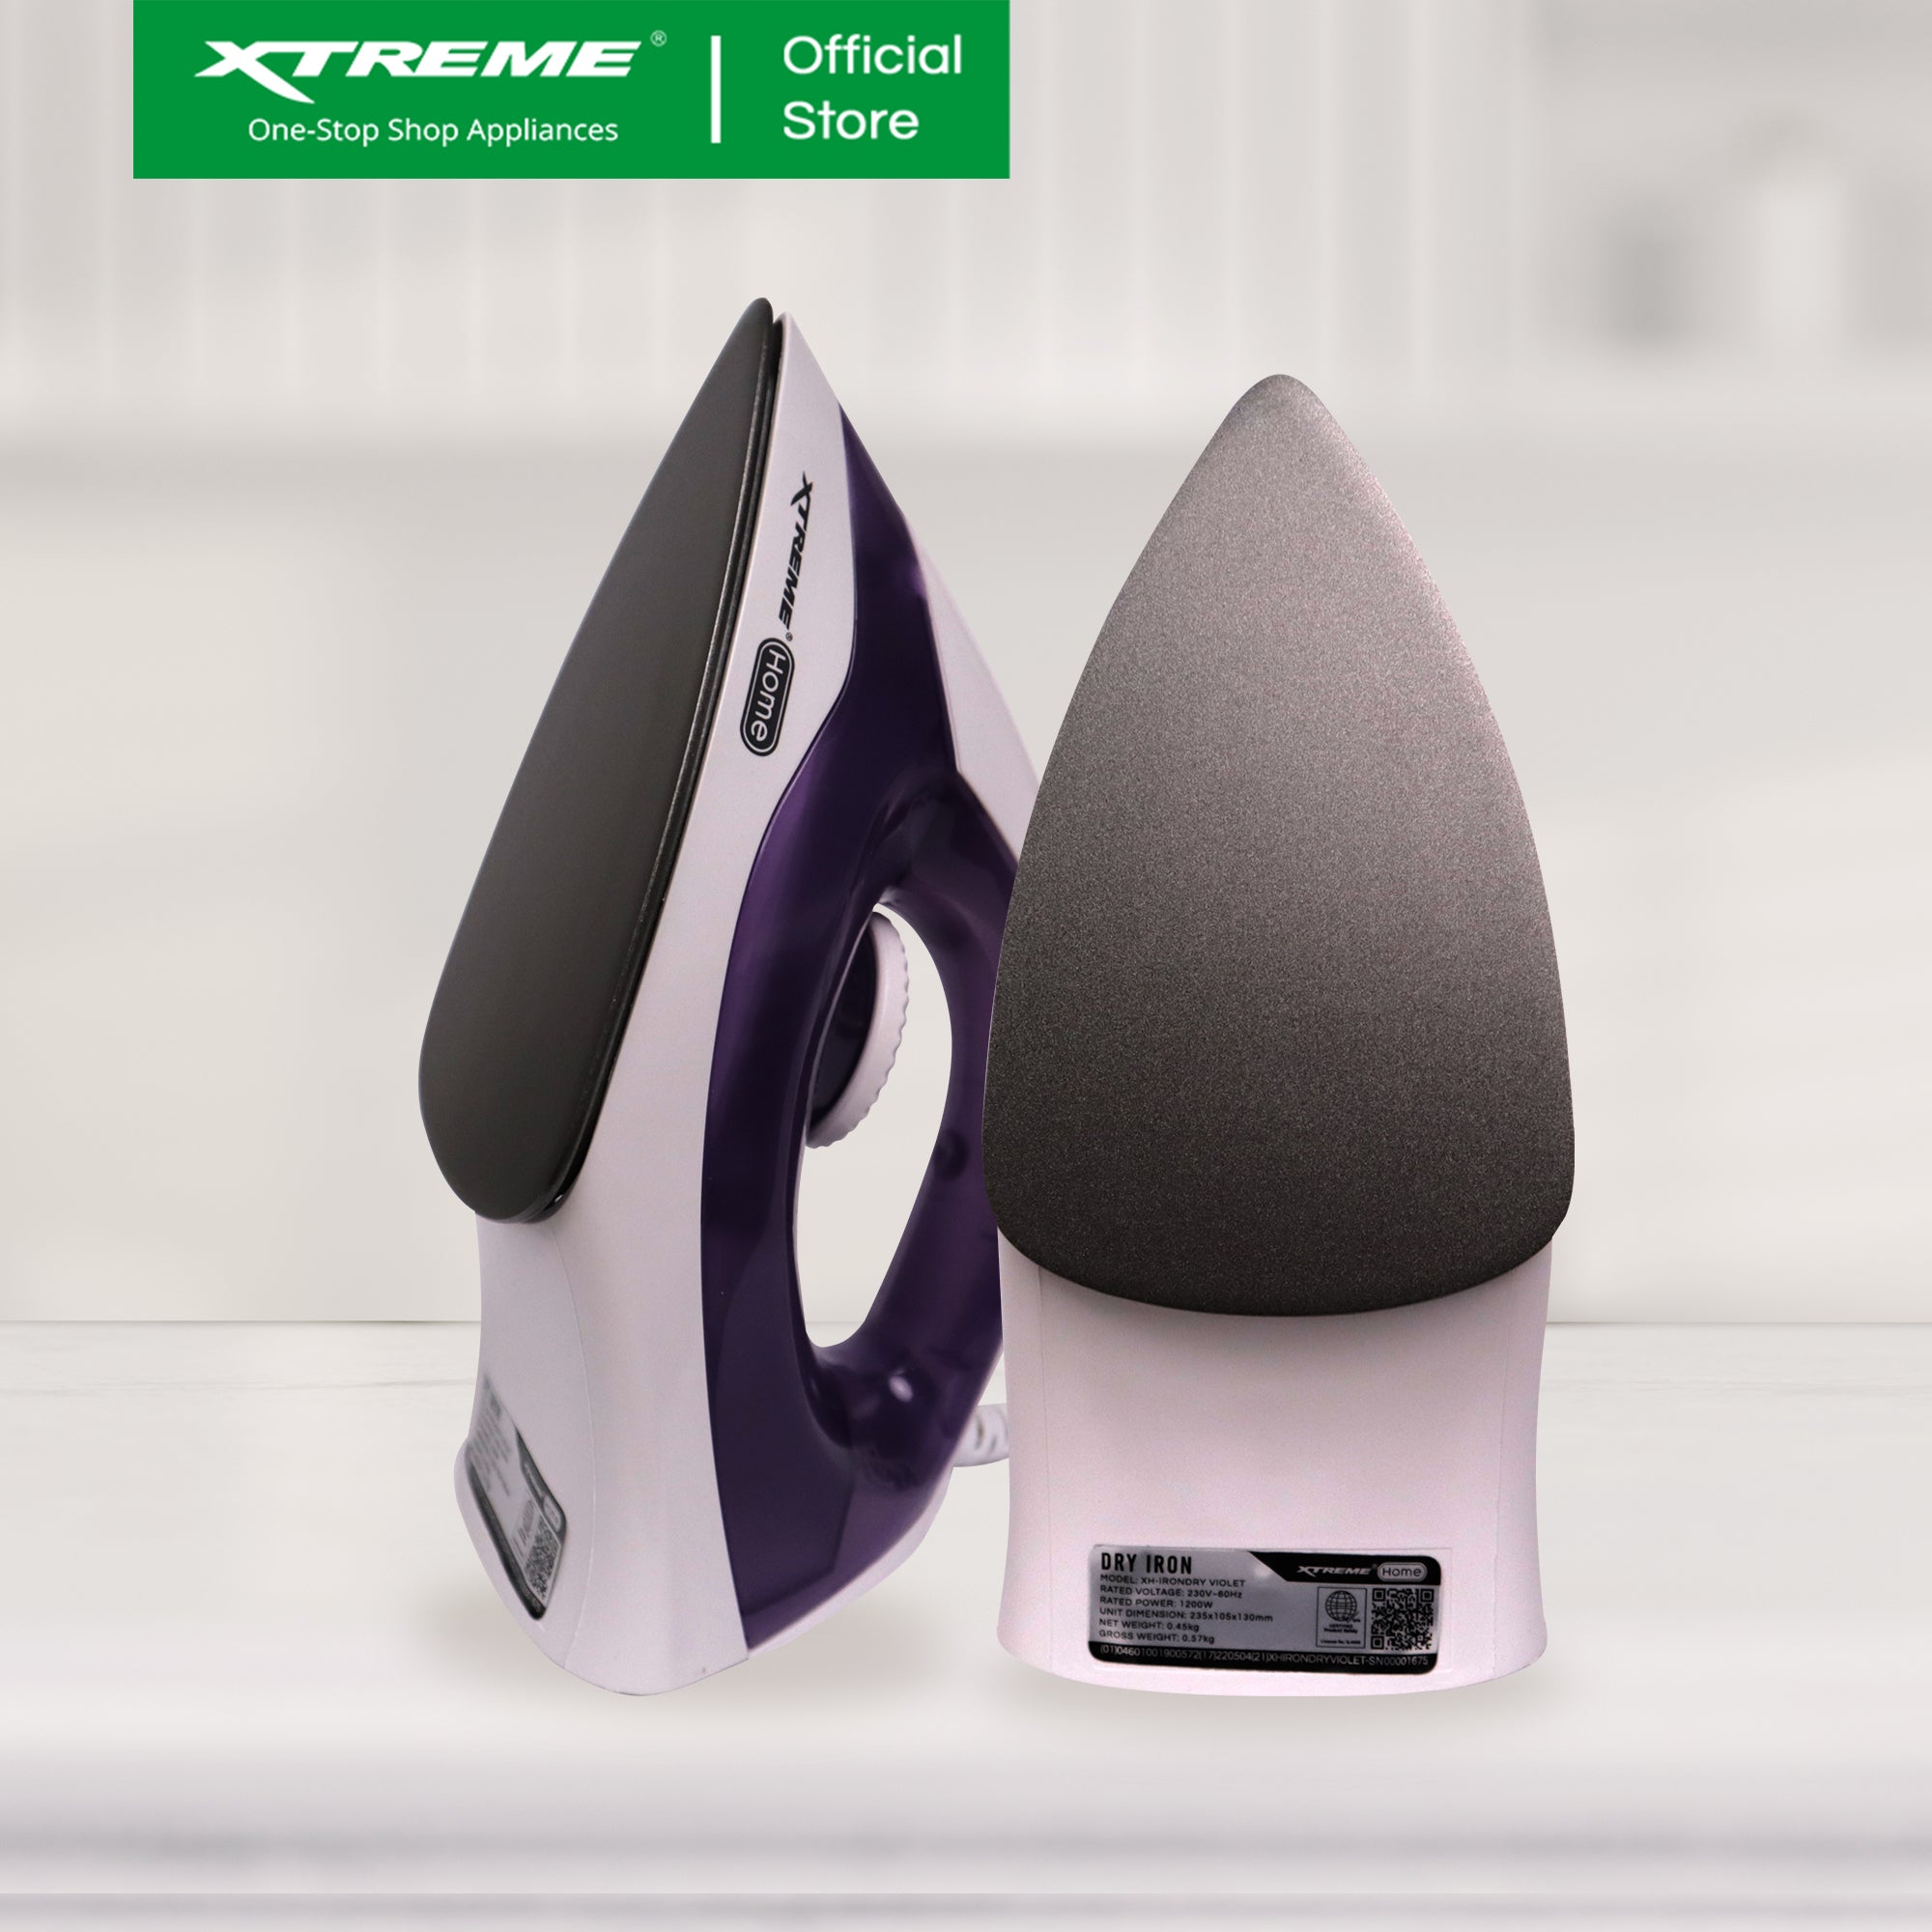 XTREME HOME Dry Iron w/ Soleplate Overheat Protection & Indicator Light (Violet) | XH-IRONDRYVIOLET